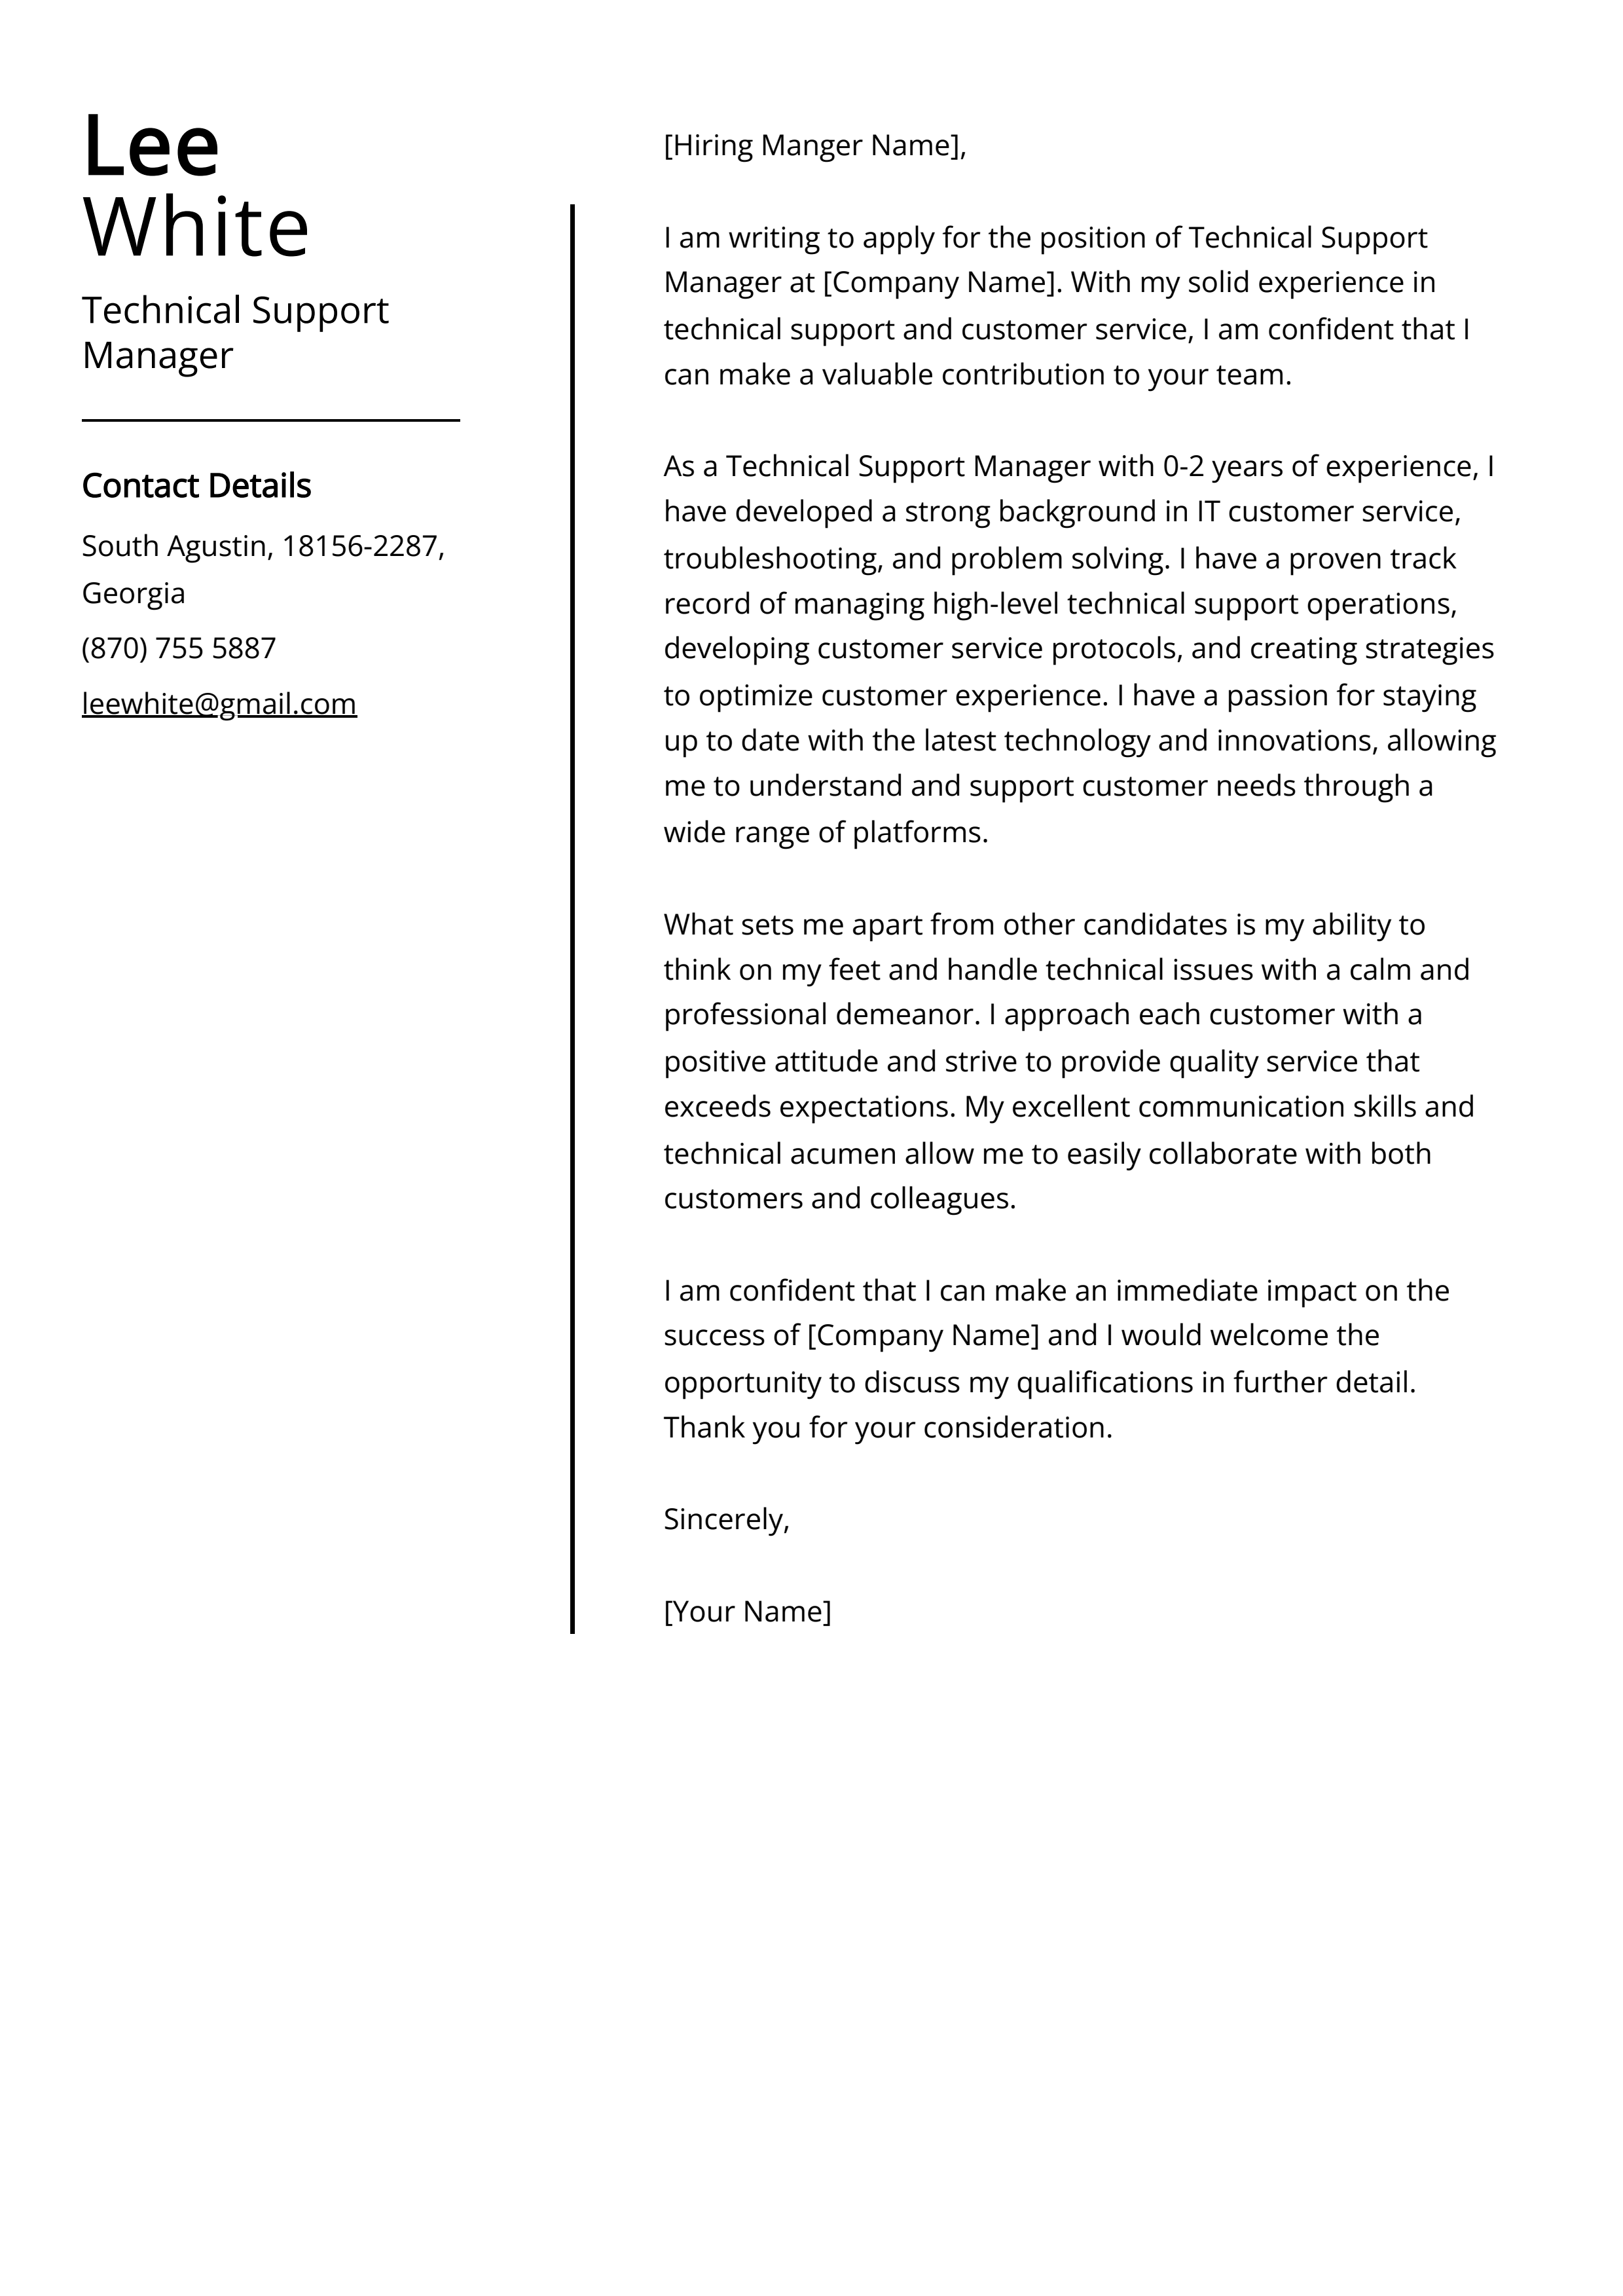 Technical Support Manager Cover Letter Example